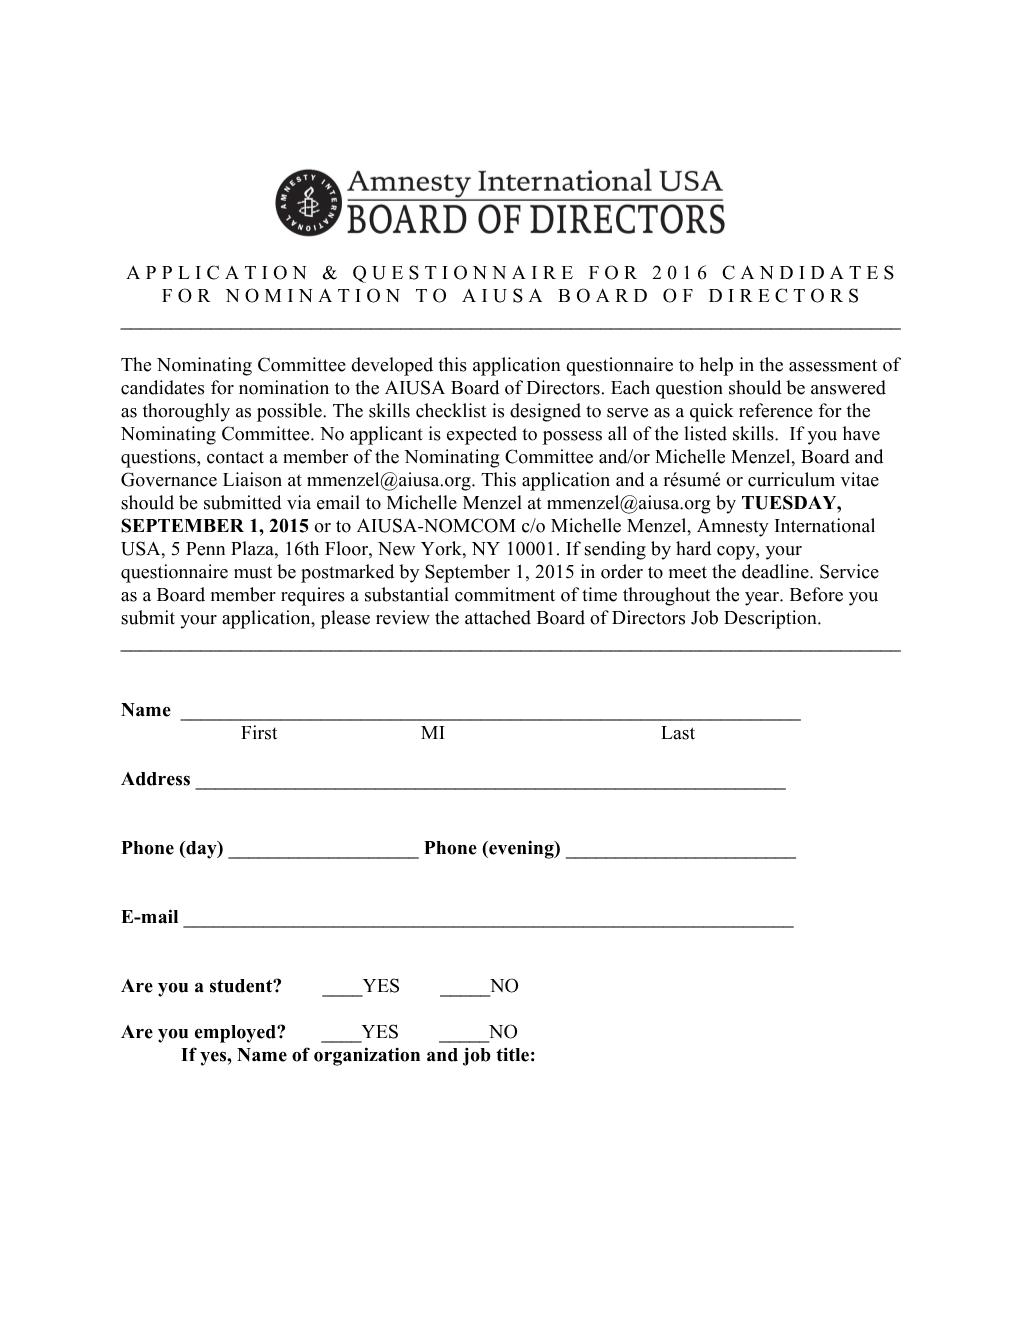 Application & Questionnaire for 2016 Candidates for Nomination to Aiusa Board of Directors